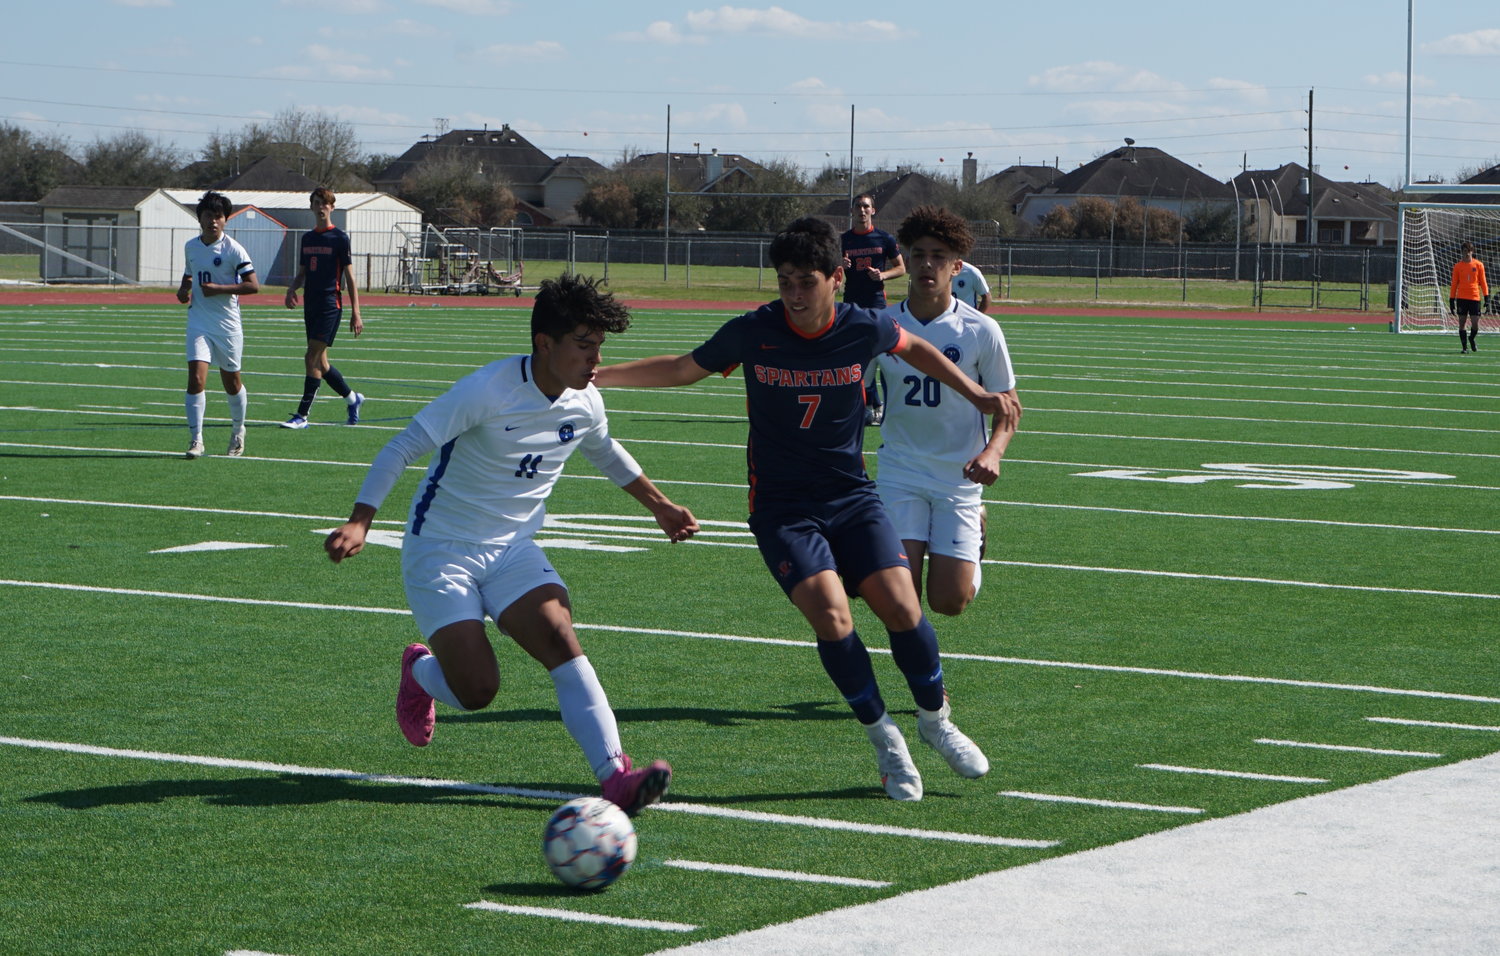 Seven Lakes senior midfielder Diego Lazo (7) and Taylor junior Gabriel Stephano Zagastizabal (11) pursue the ball during their game Saturday, March 6, at Seven Lakes High.